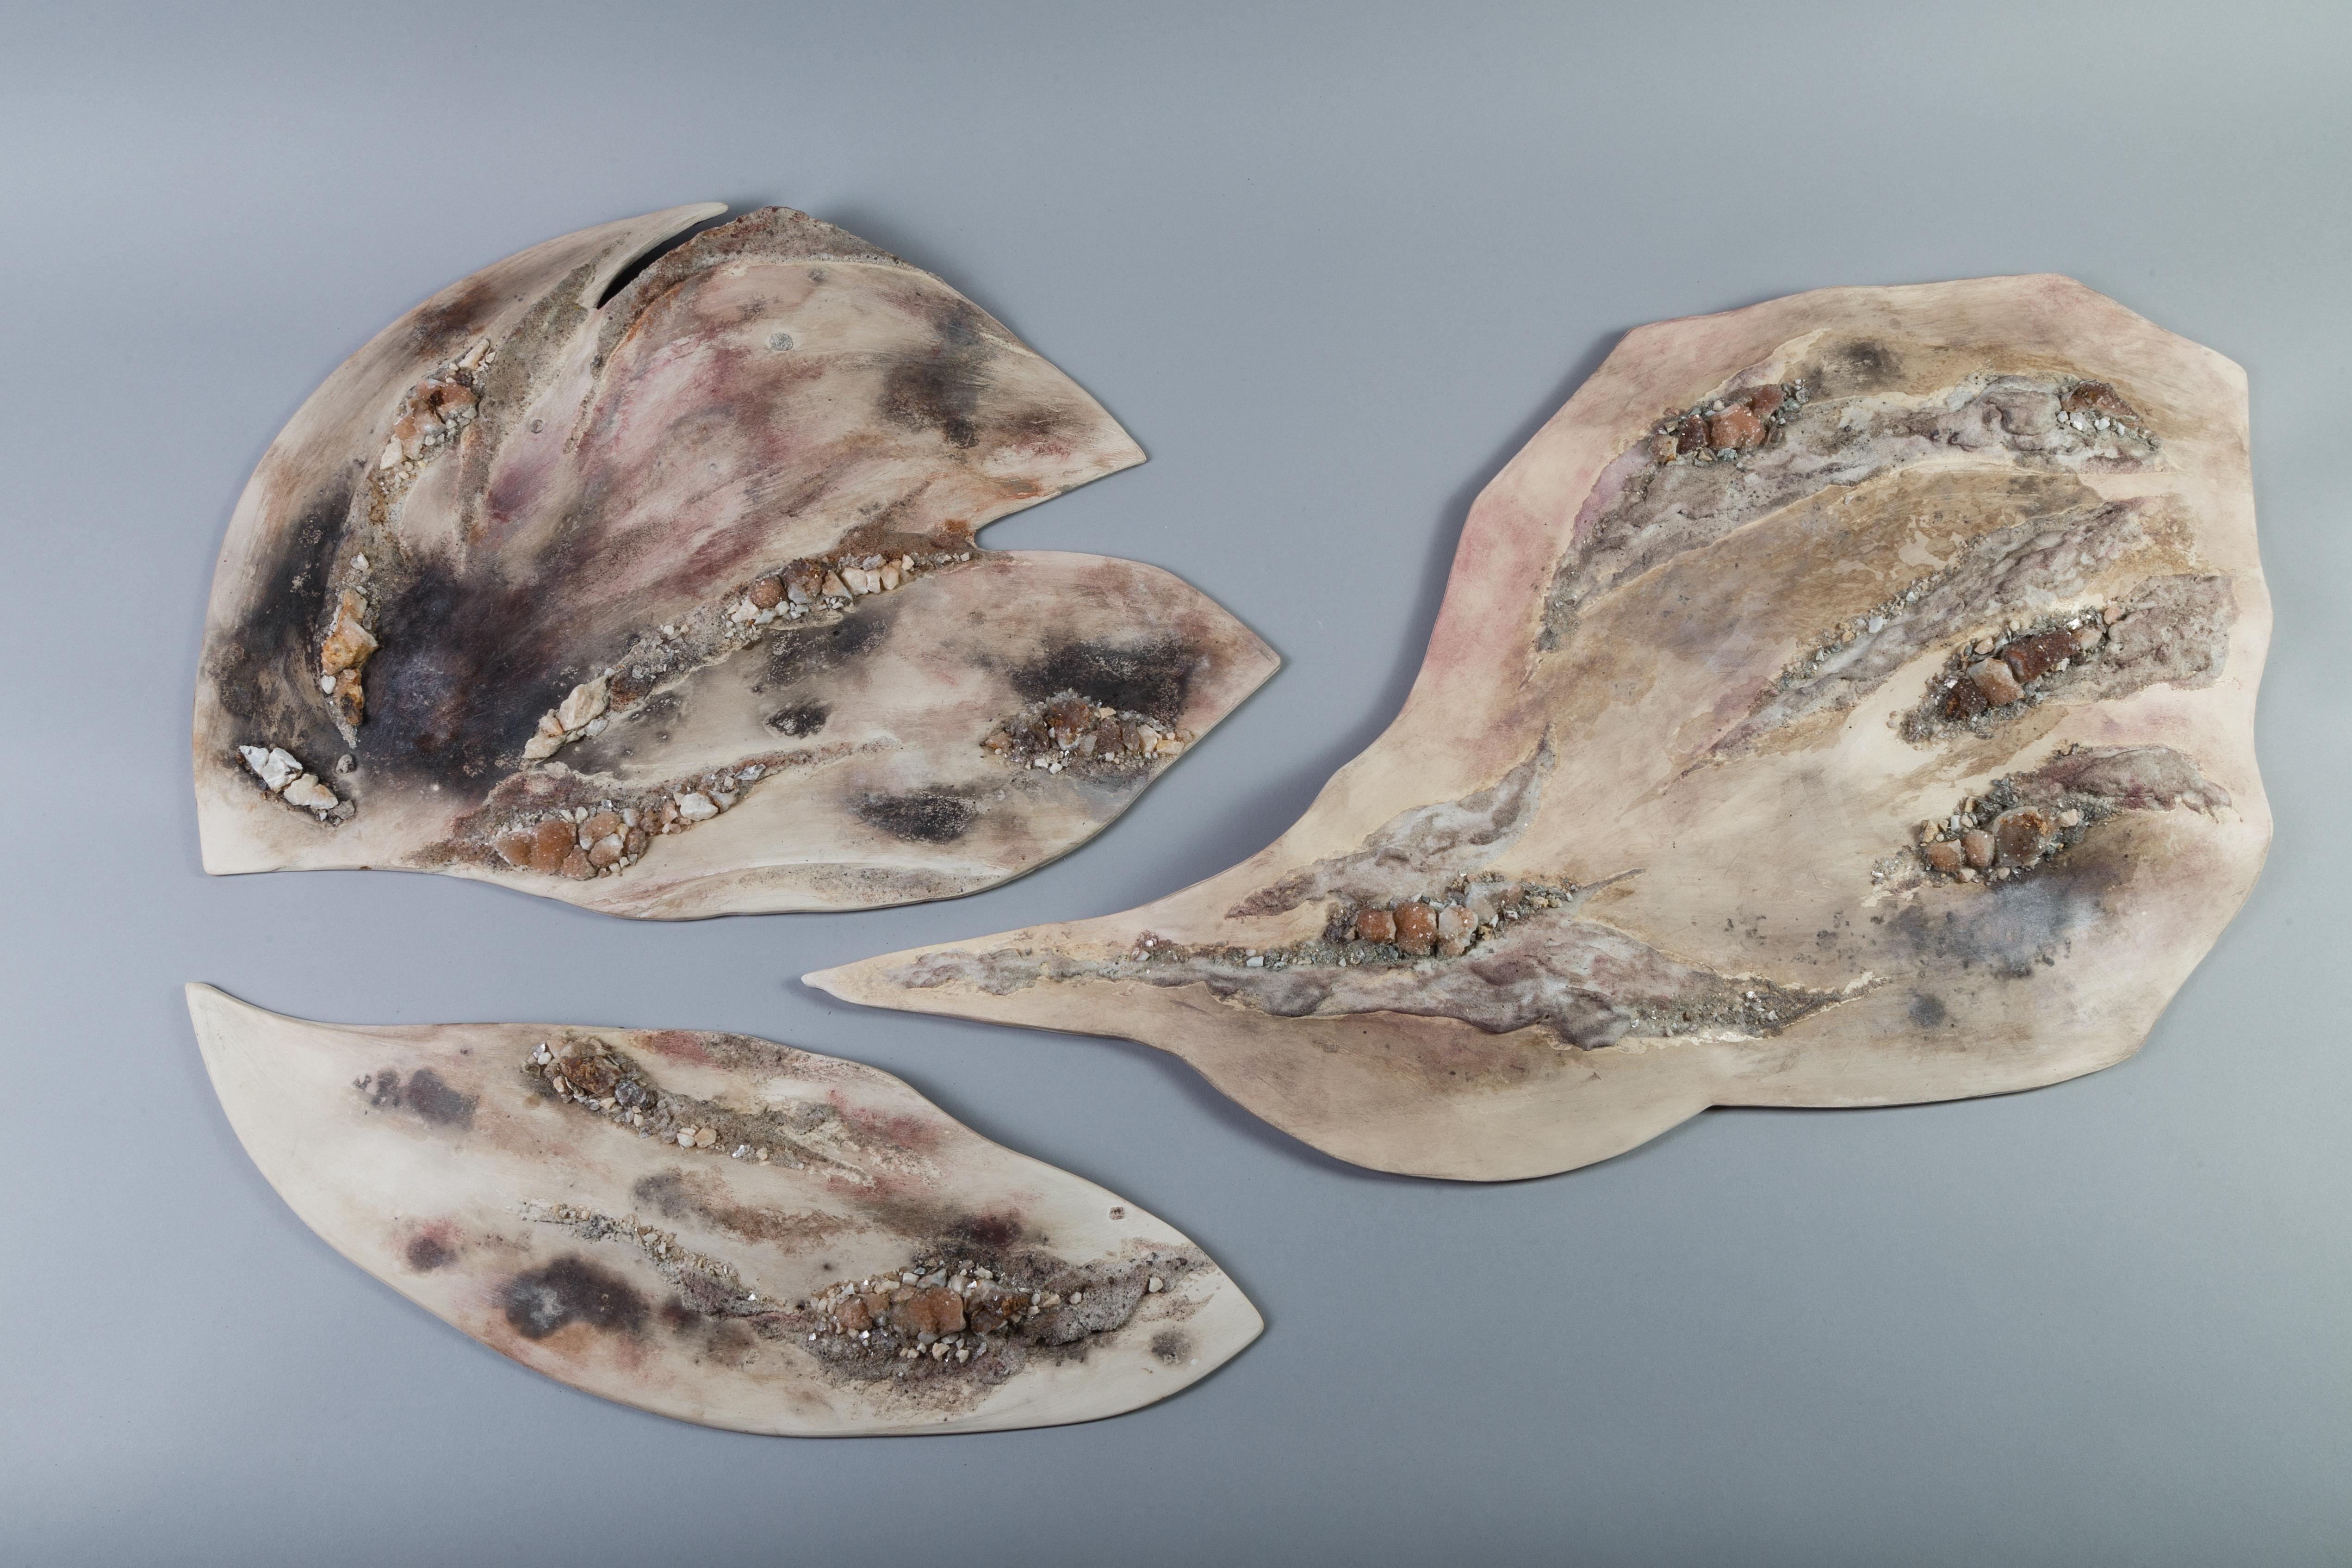 Symbiosis II is a 3 part Earthenware wall panel by French ceramicist Claire Frechet. The work in a one-off handcrafted form made of polished earthenware with varied glazes, mixed volcanic sands, additionally applied patinas, and hand applied quartz